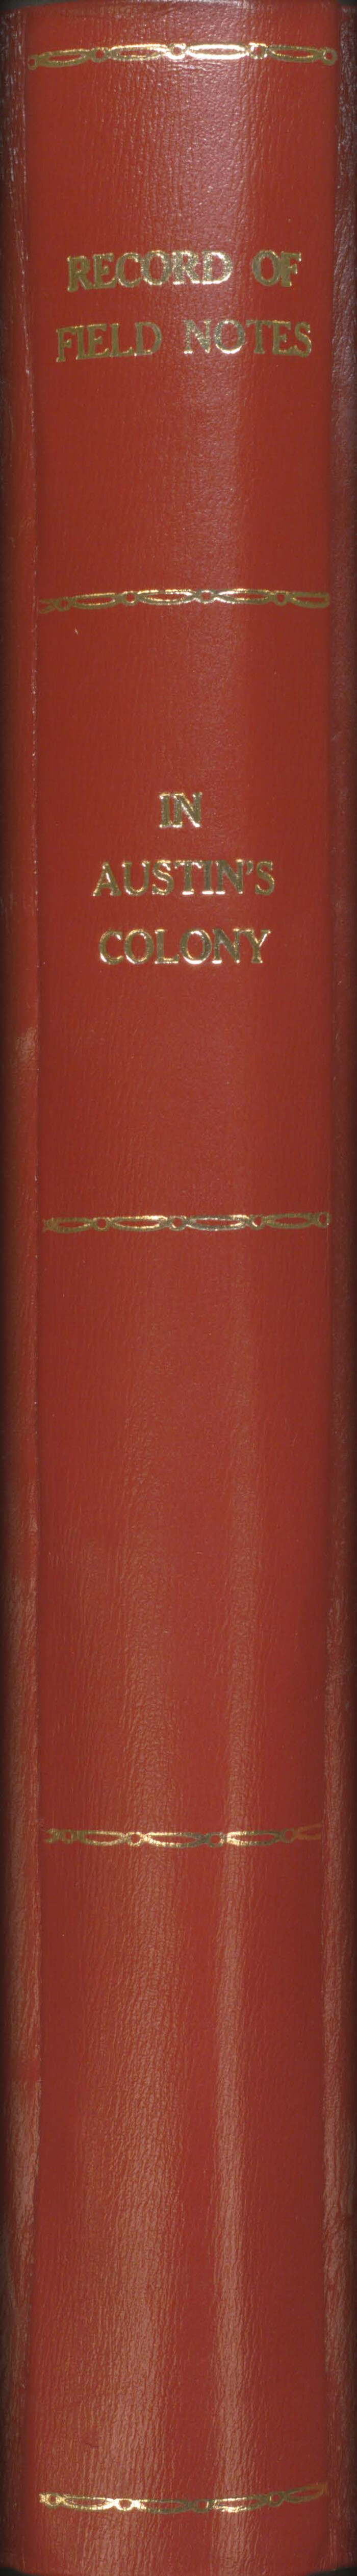 96673, Record of Field Notes in Austin's Colony, Historical Volumes